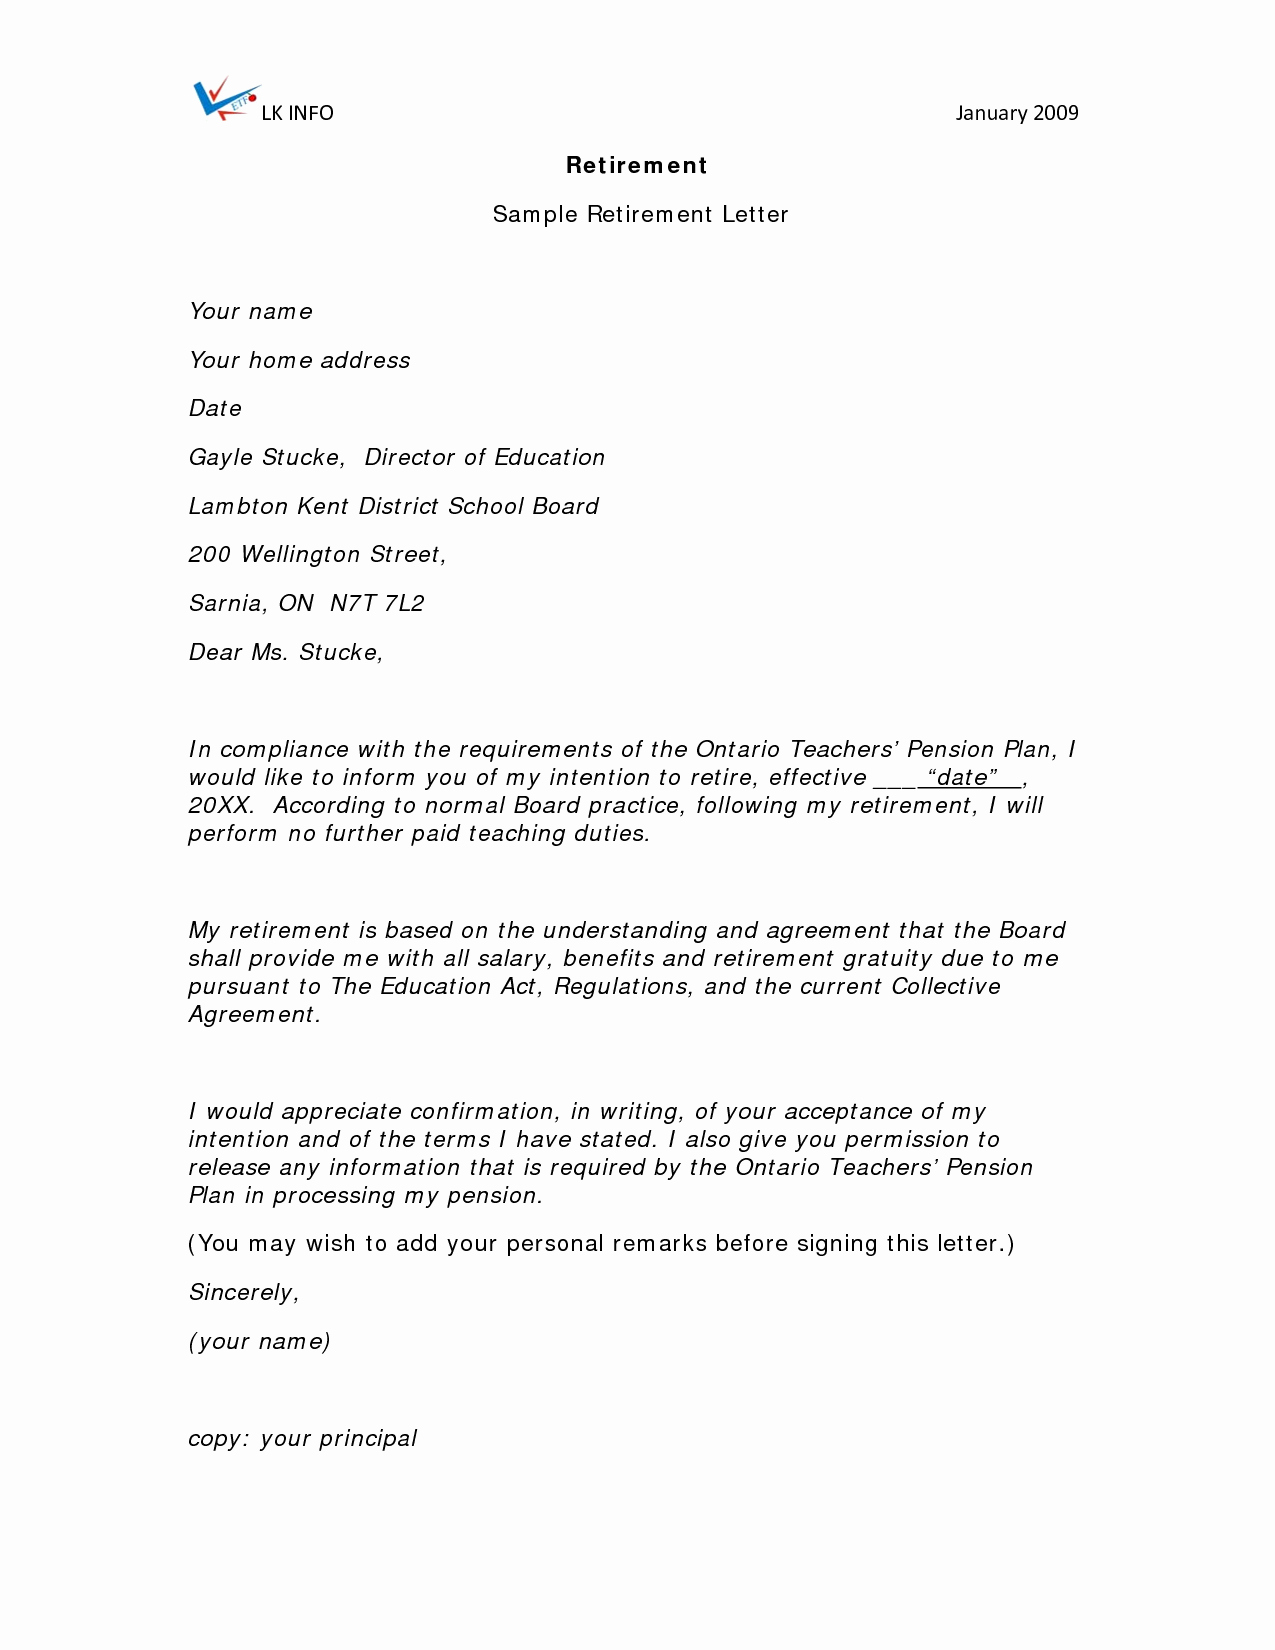 Sample Early Retirement Letter to Employer